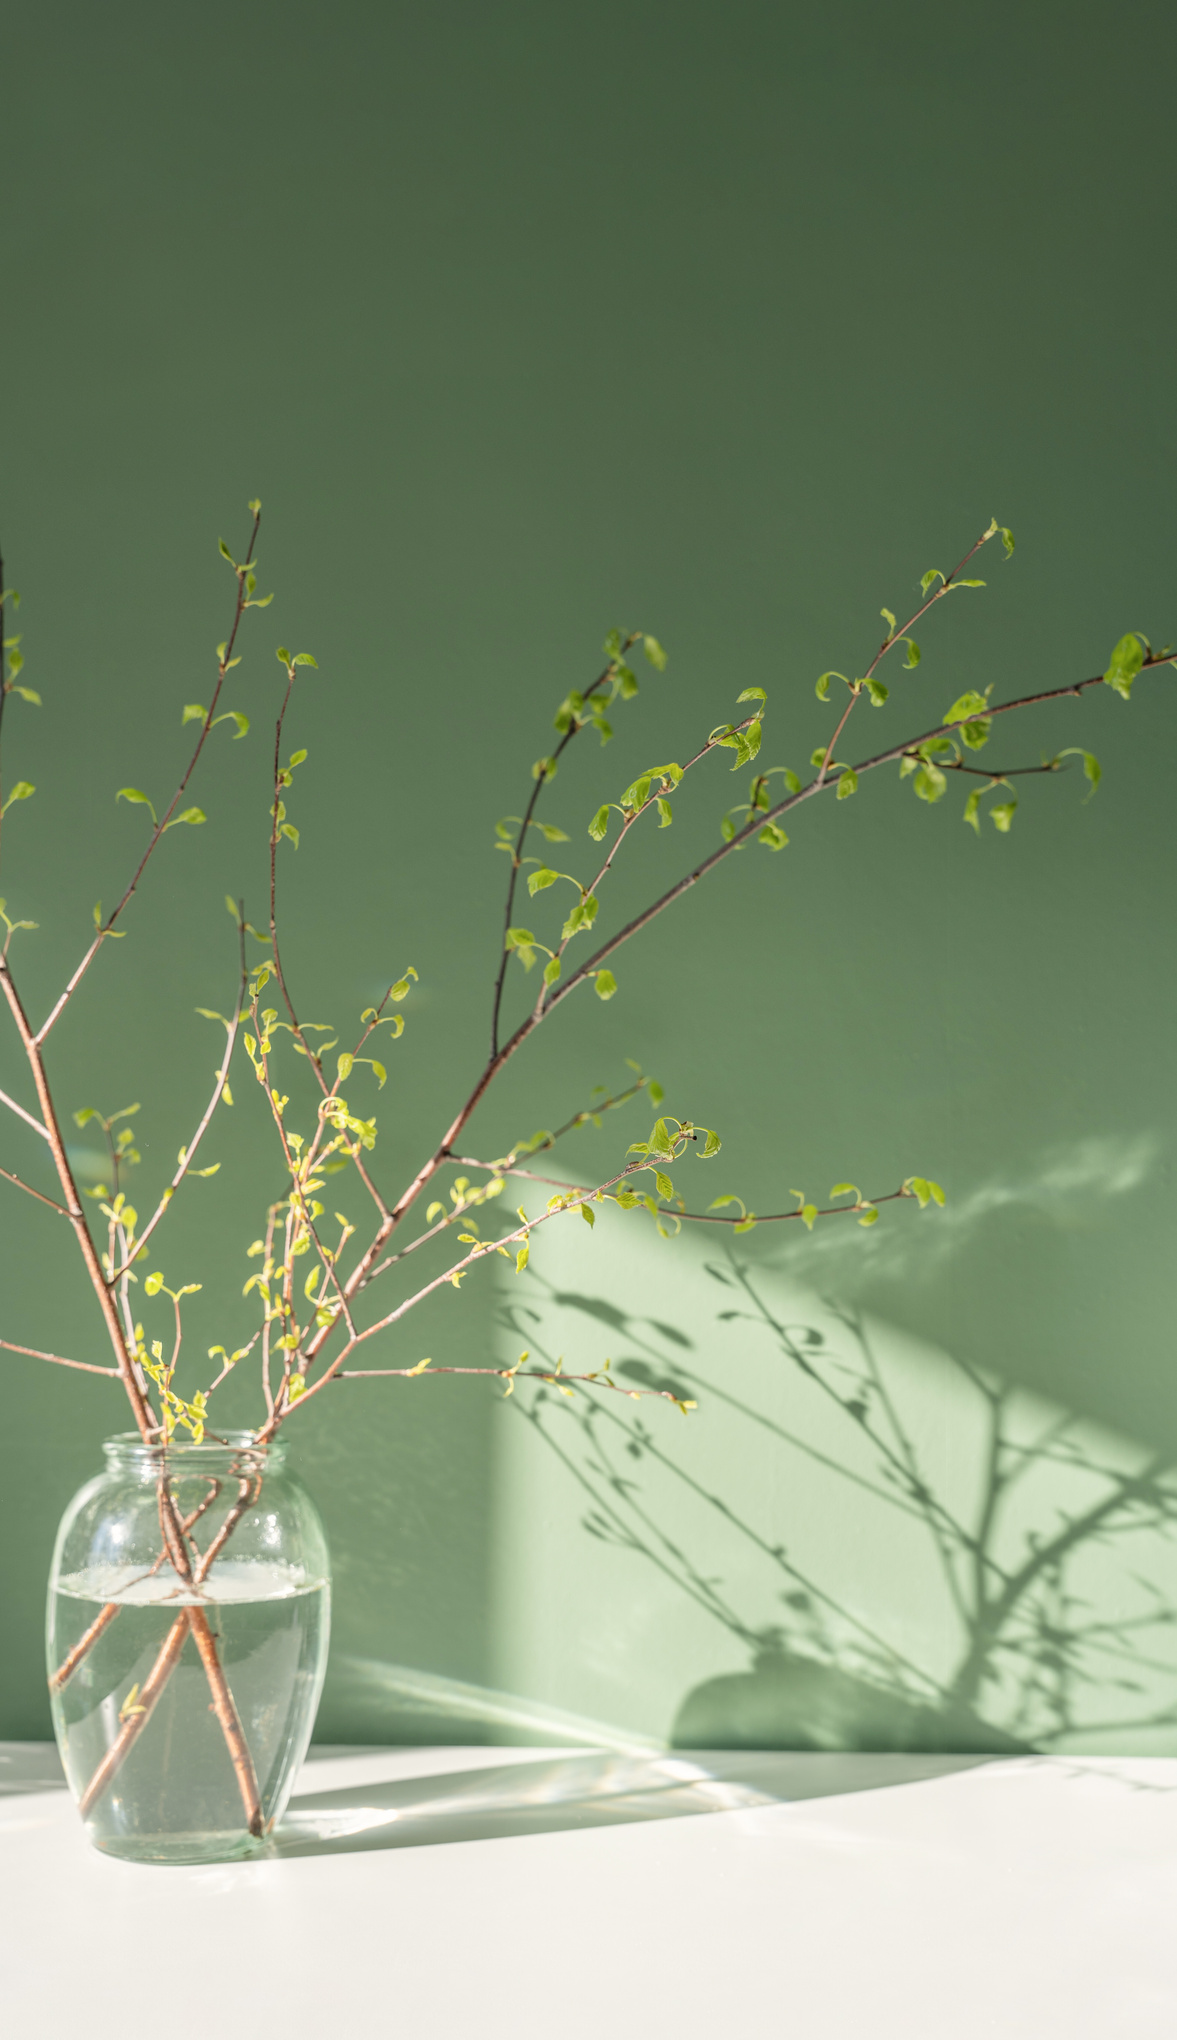 Aesthetic and minimalist spring and Easter background with tree branches in a vase